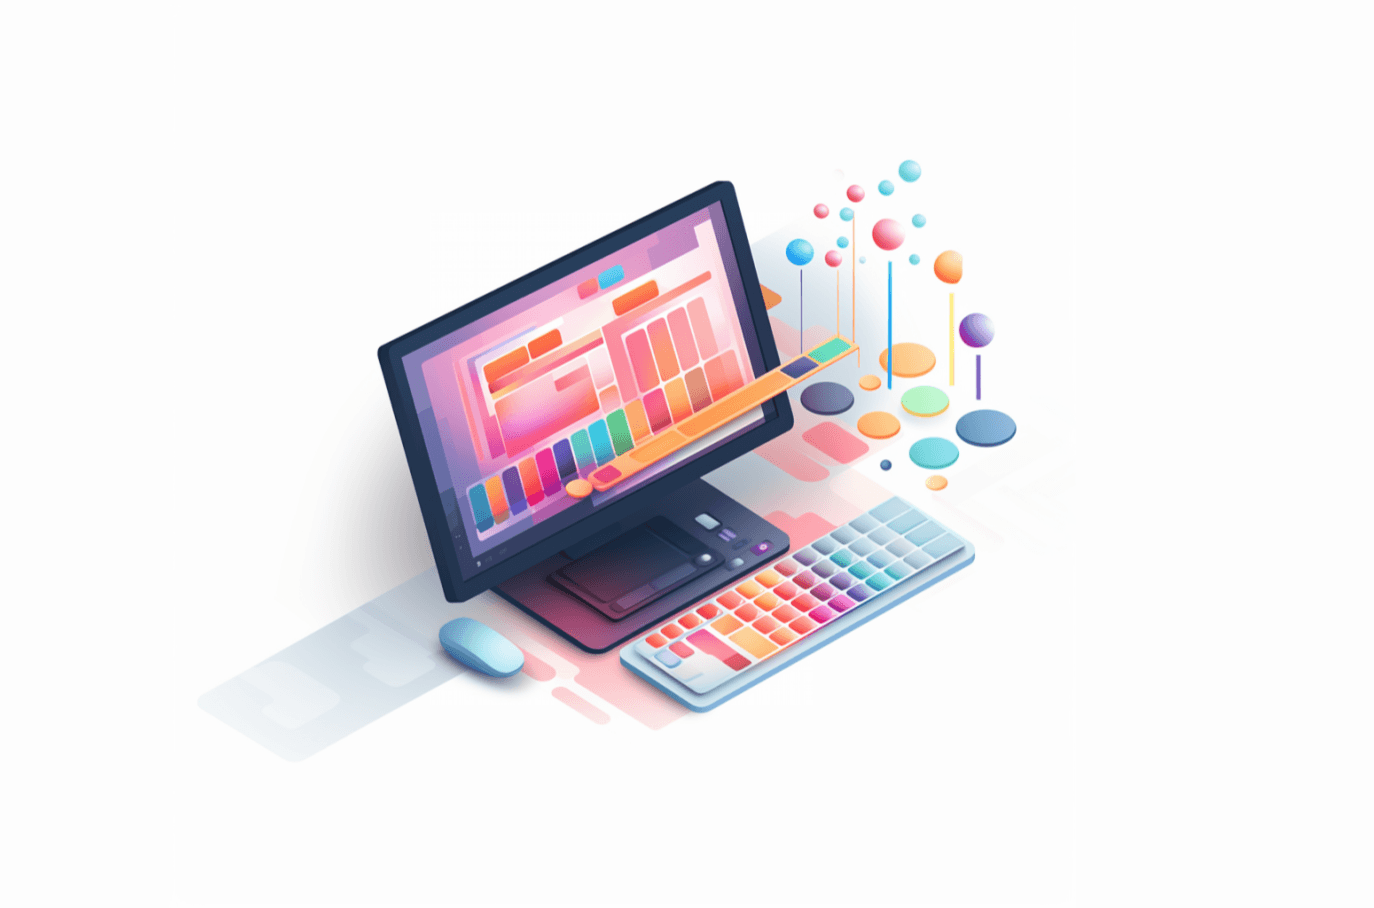 An AI generated illustration of a computer with small graphic elements on screen, representing design systems and UI design